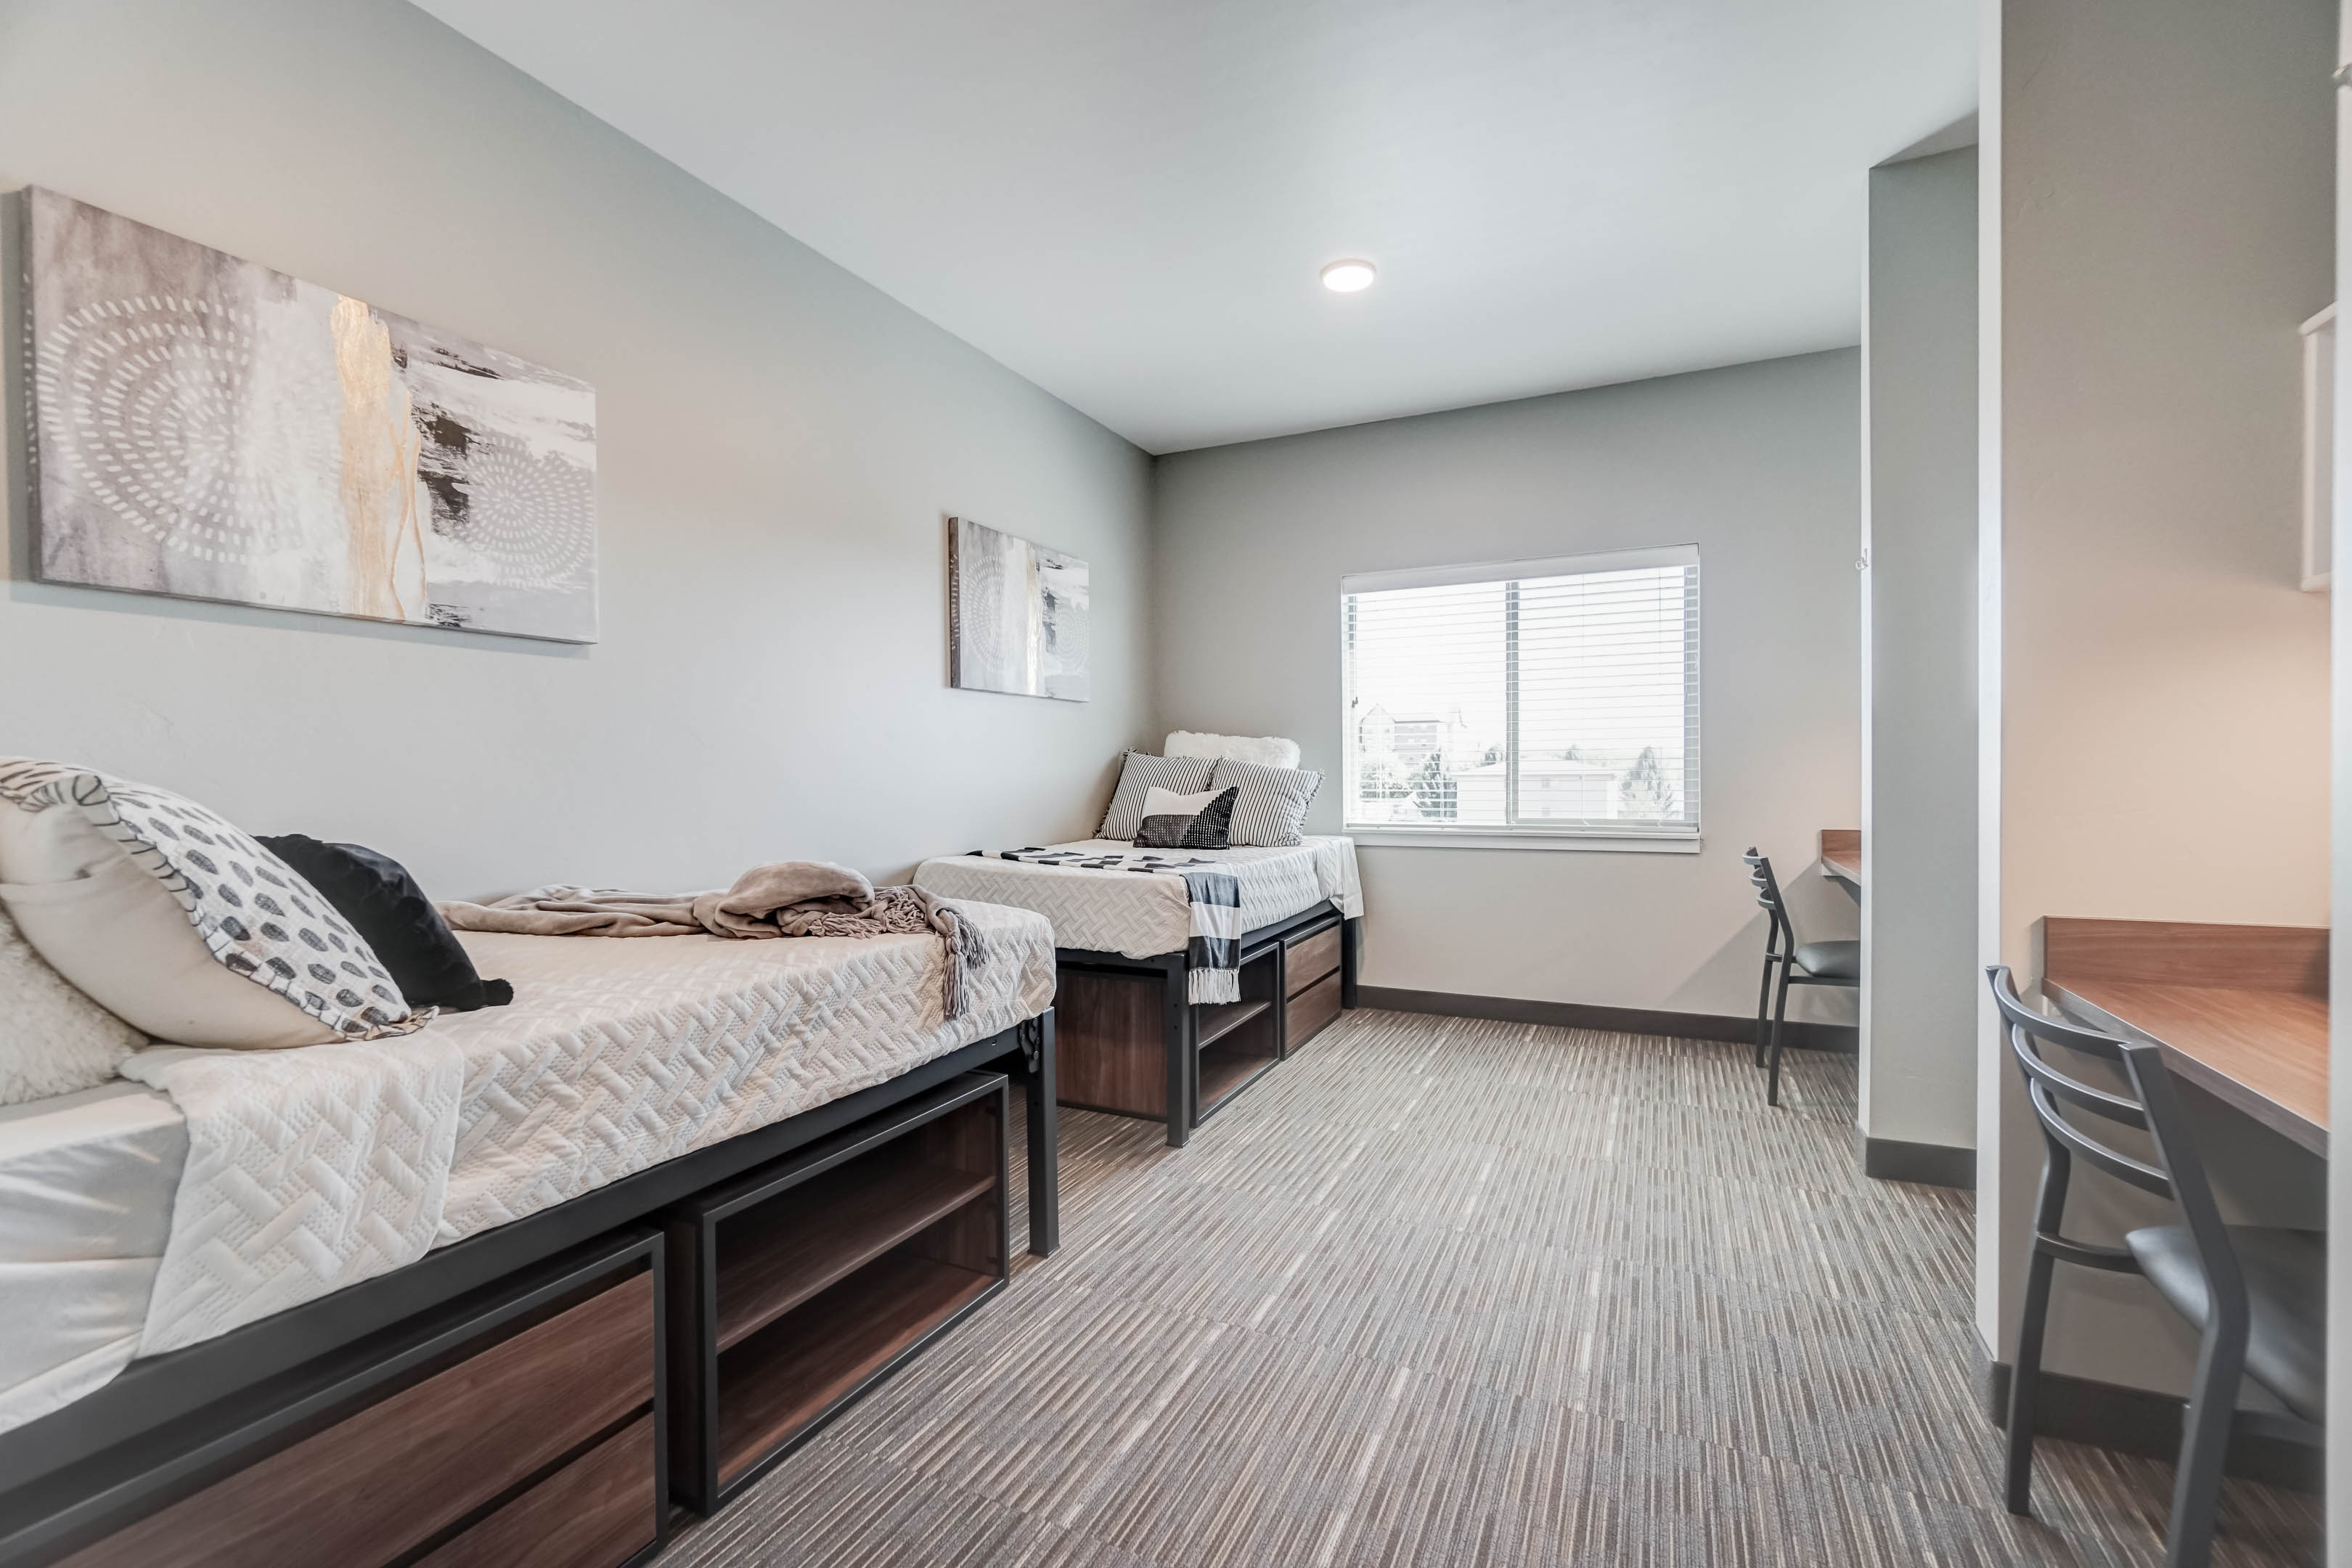 All bedrooms come with built-in desks, personal closets, and lots of storage under the bed.